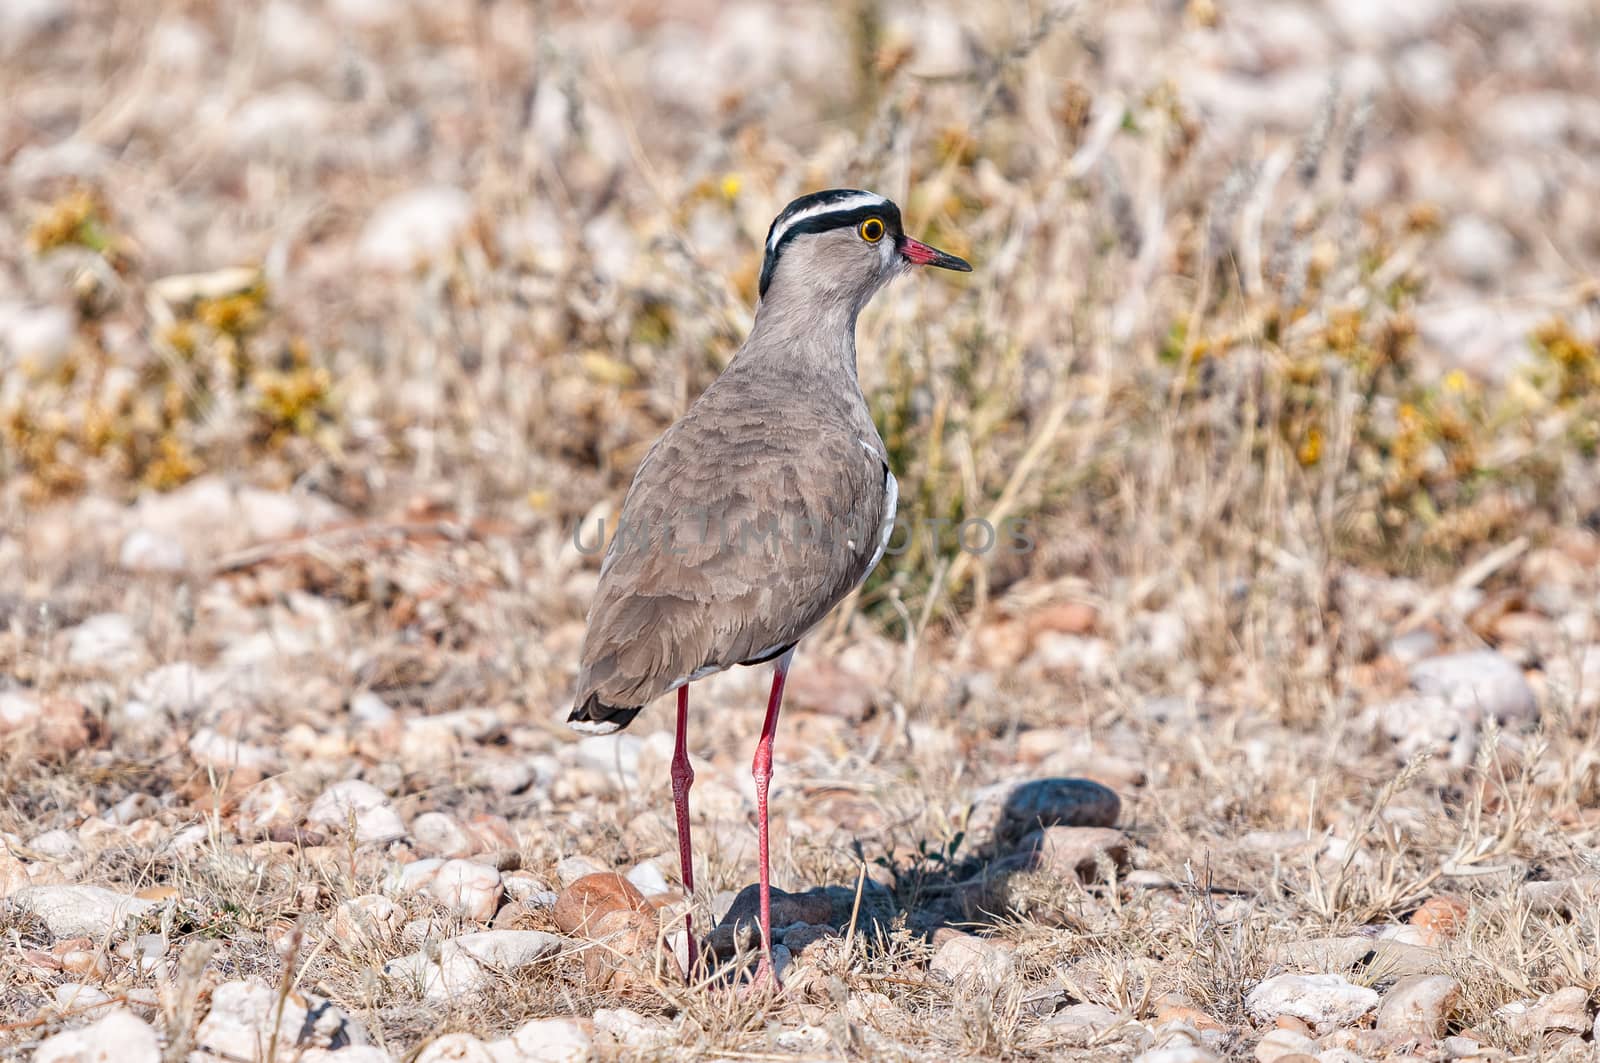 Crowned plover, Vanellus coronatus, on the ground by dpreezg